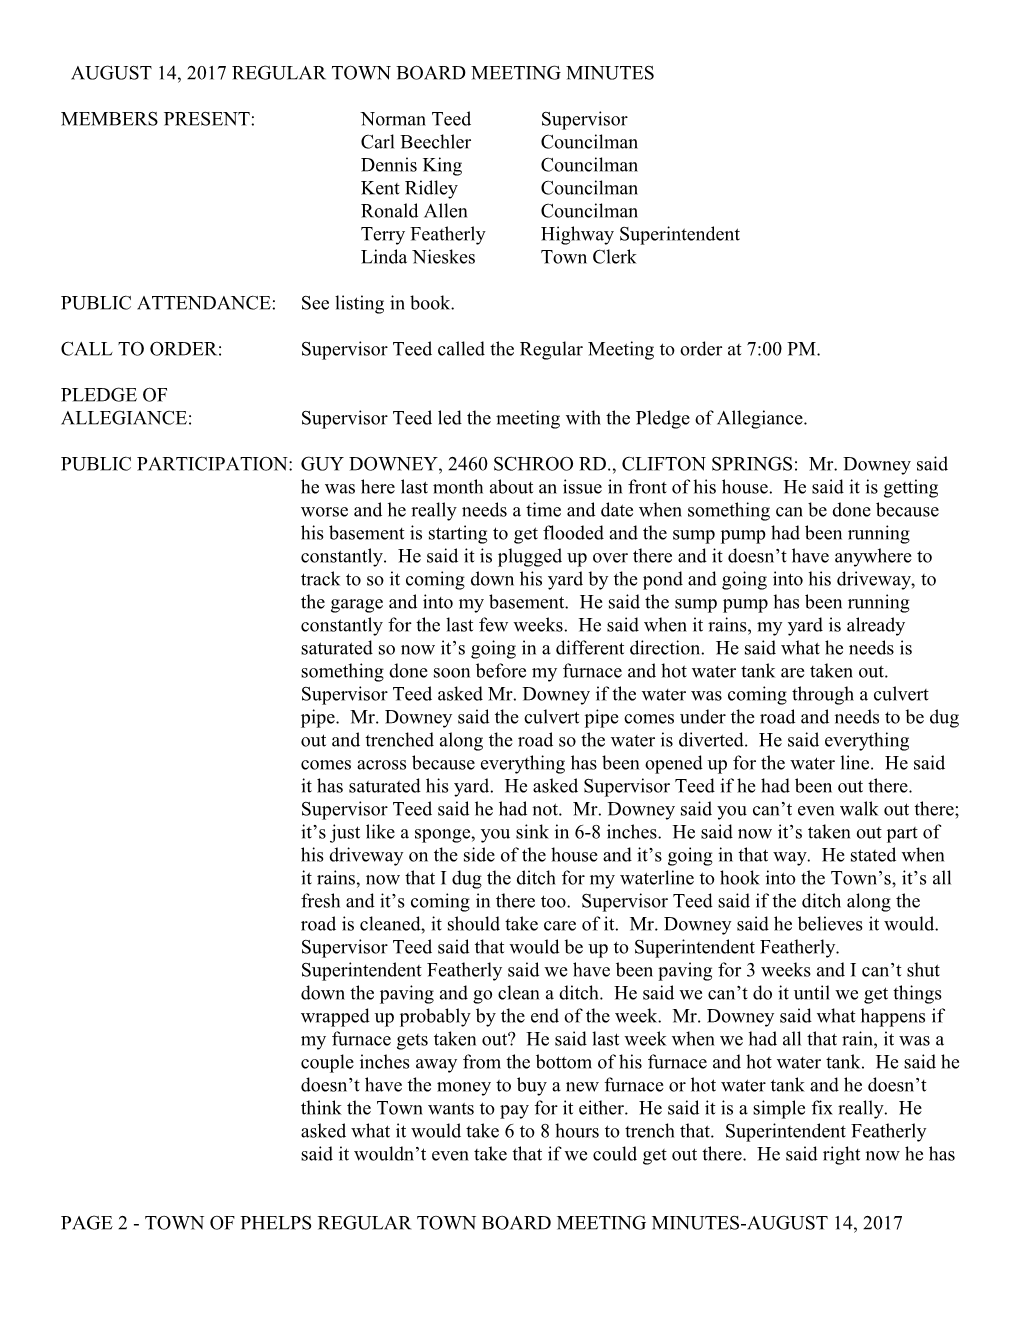 February 6, 2006 Regular Town Board Meeting Minutes s1